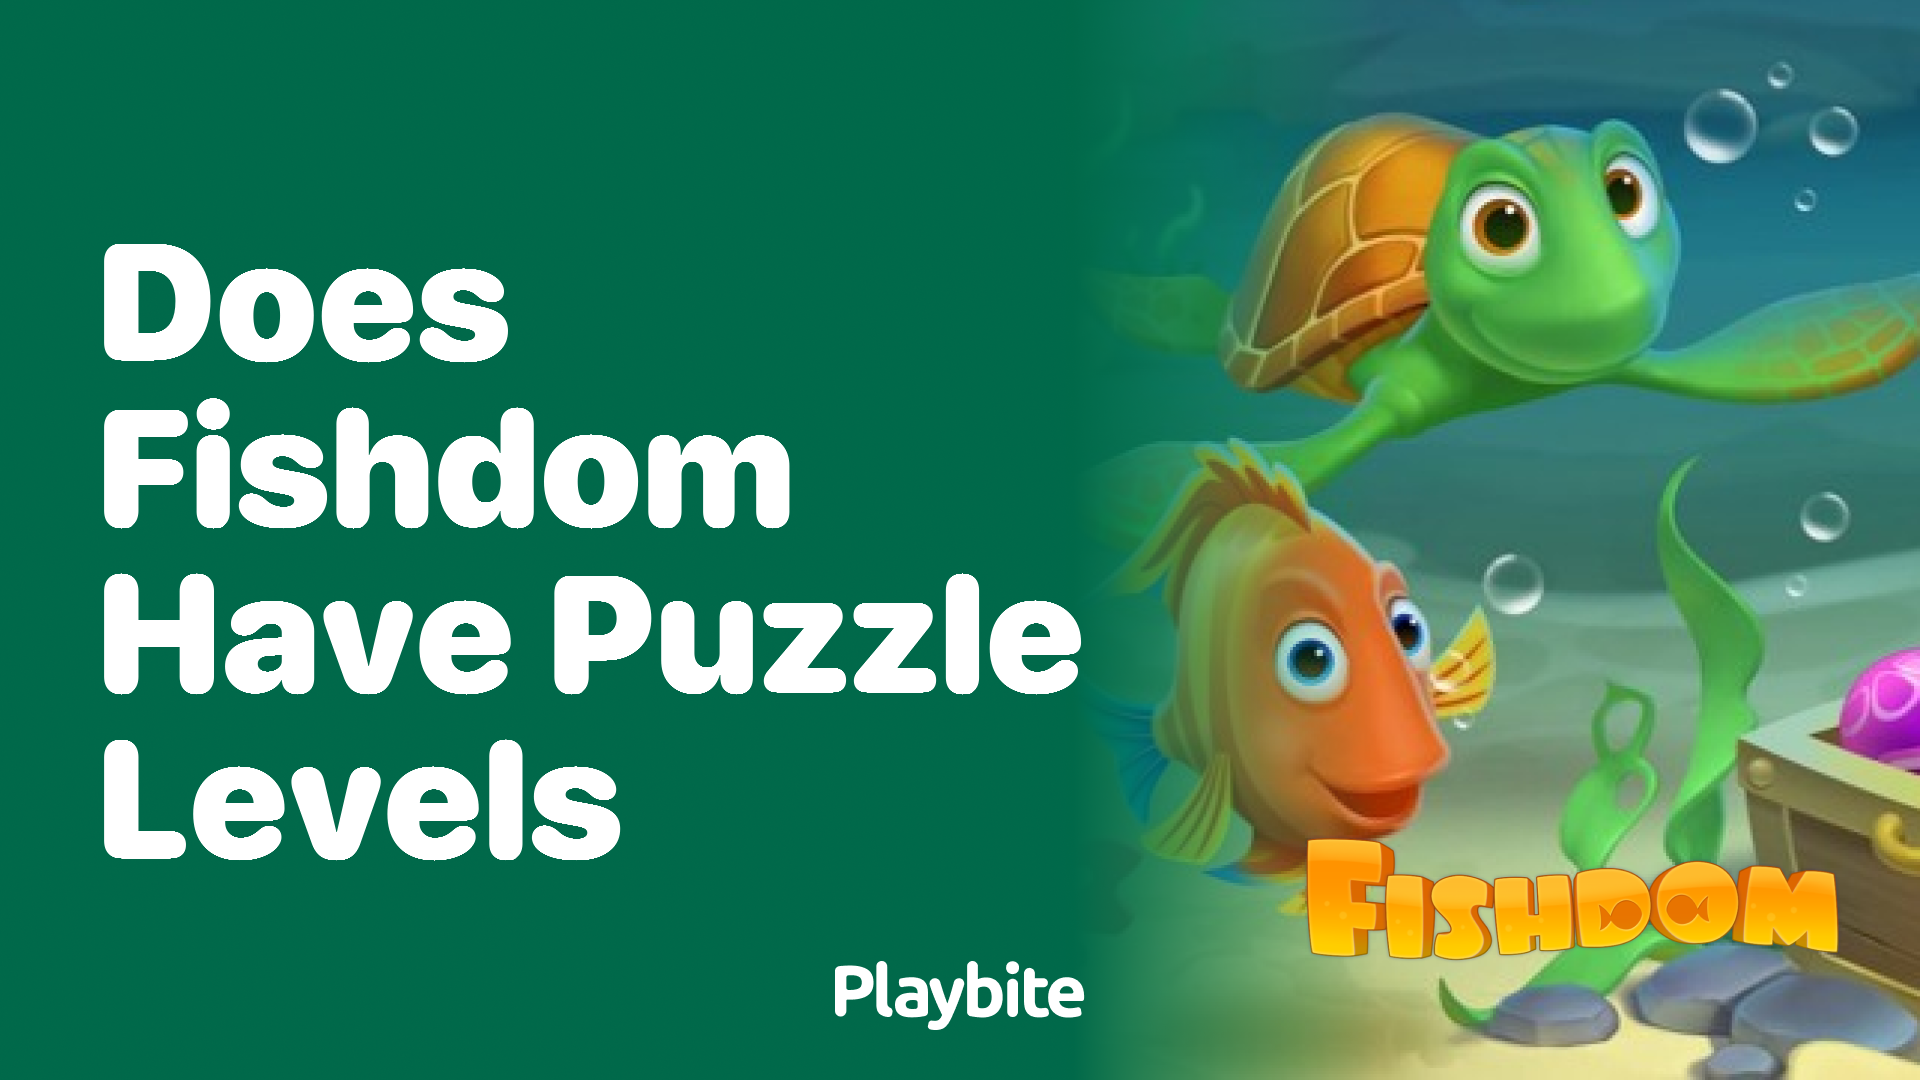 Does Fishdom Have Puzzle Levels?